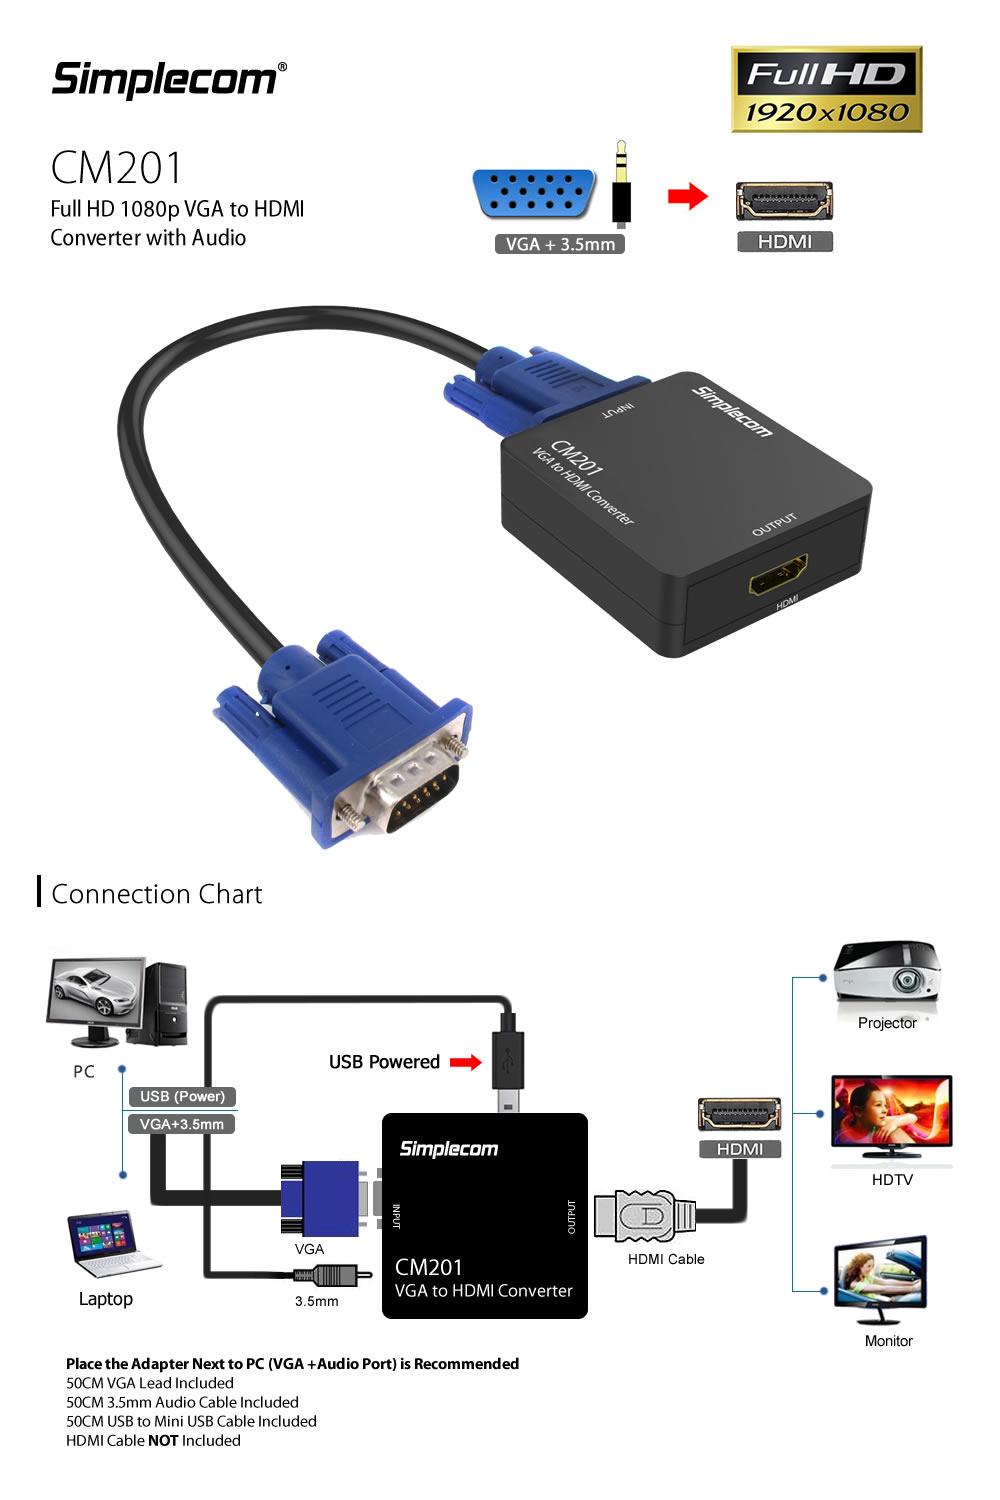 Display-Adapters-Simplecom-CM201-Full-HD-1080p-VGA-to-HDMI-Converter-with-Audio-1